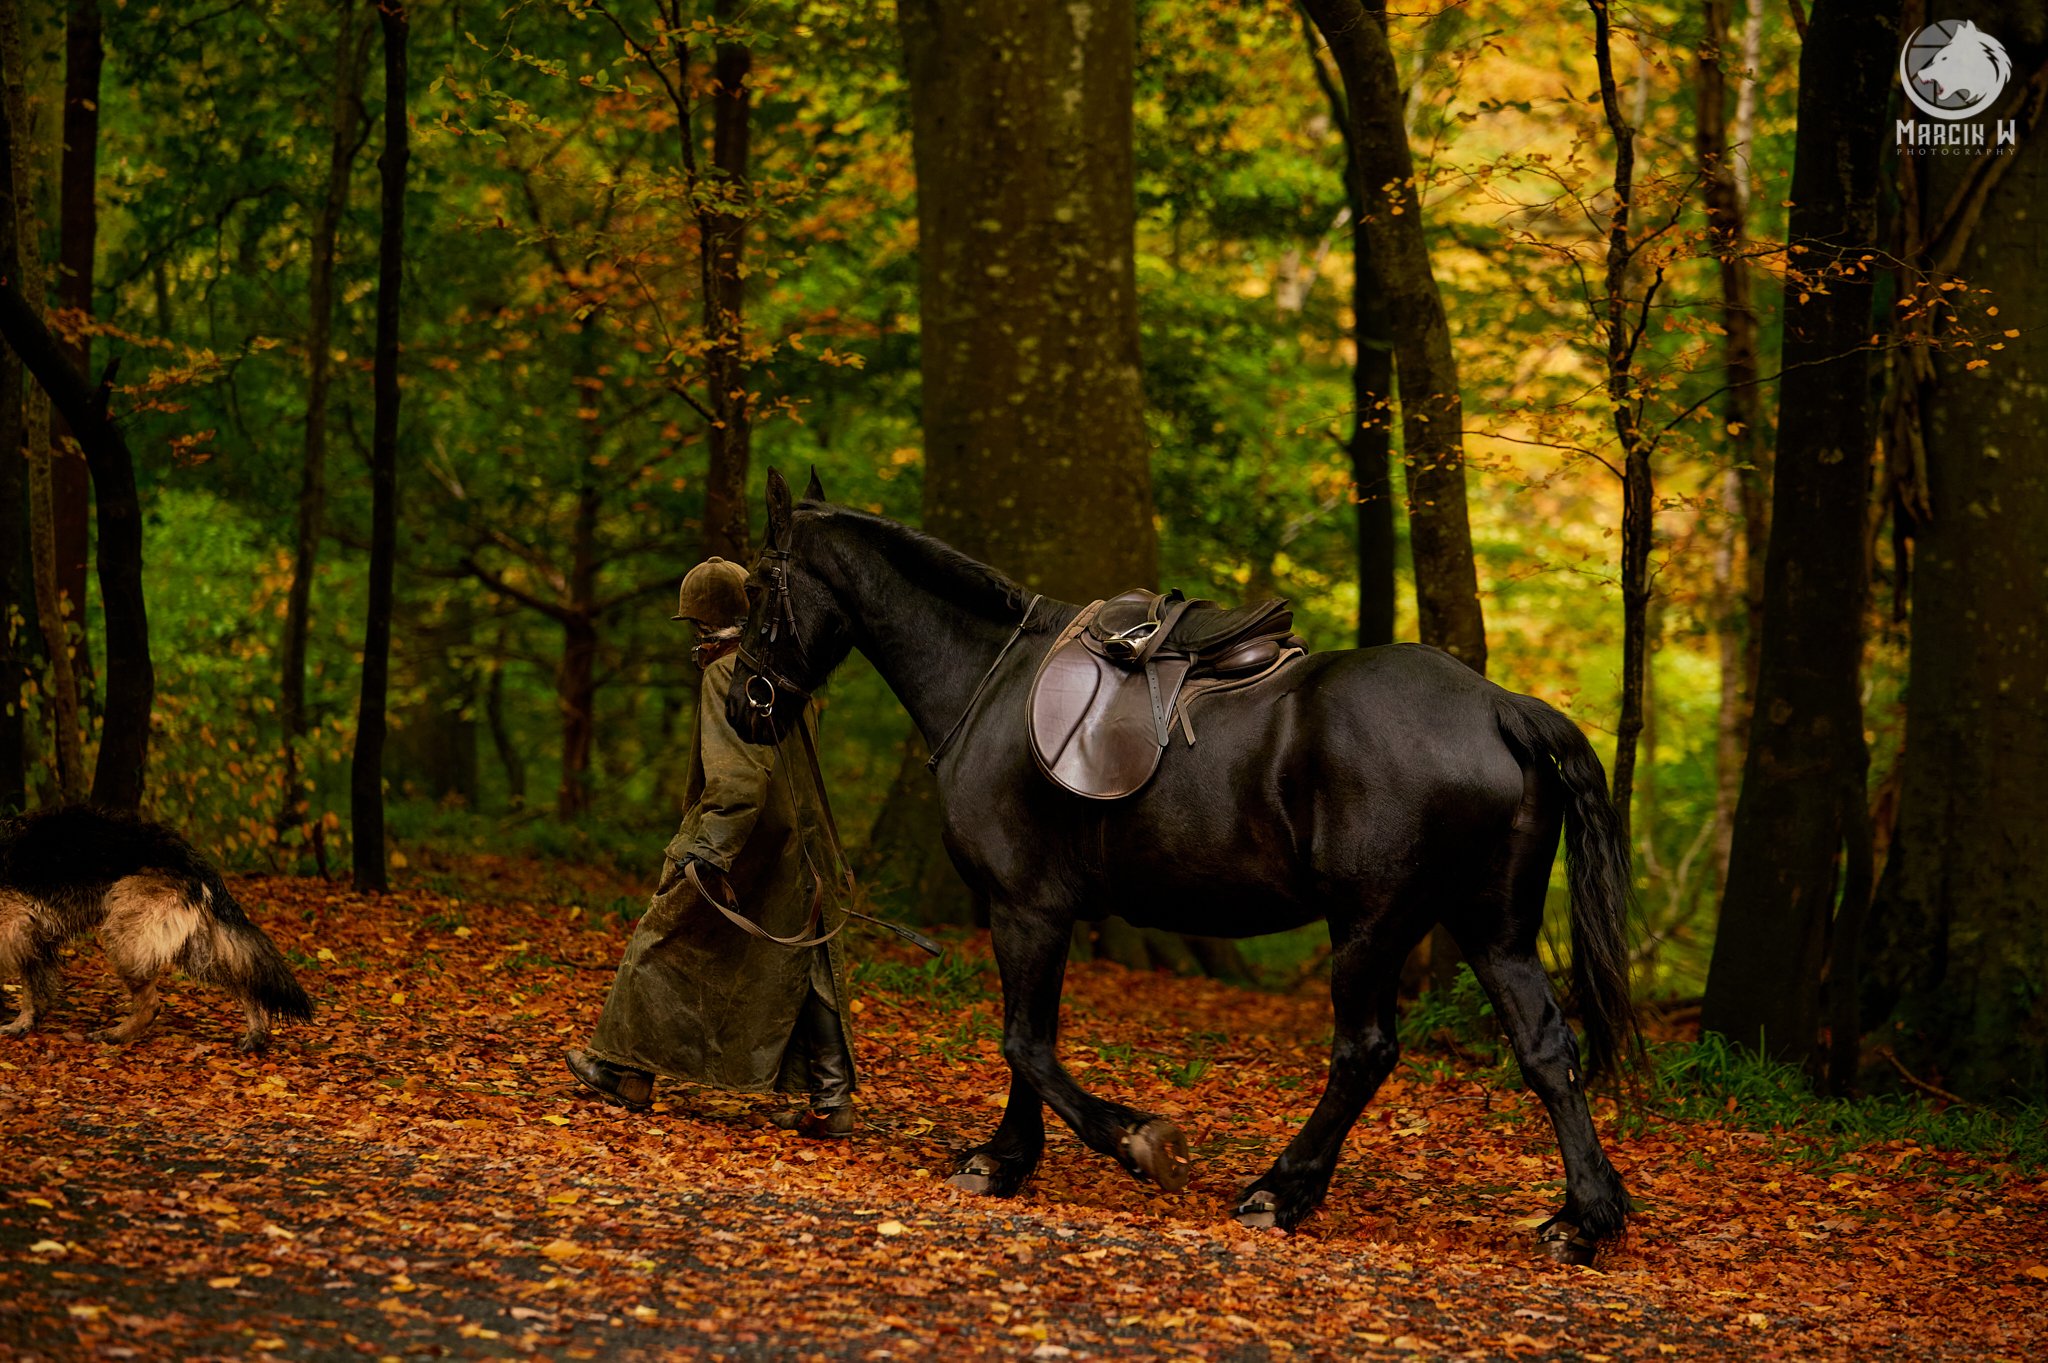 Tollymore_Horse_Dog_Marcin_W_Photography 2.jpg